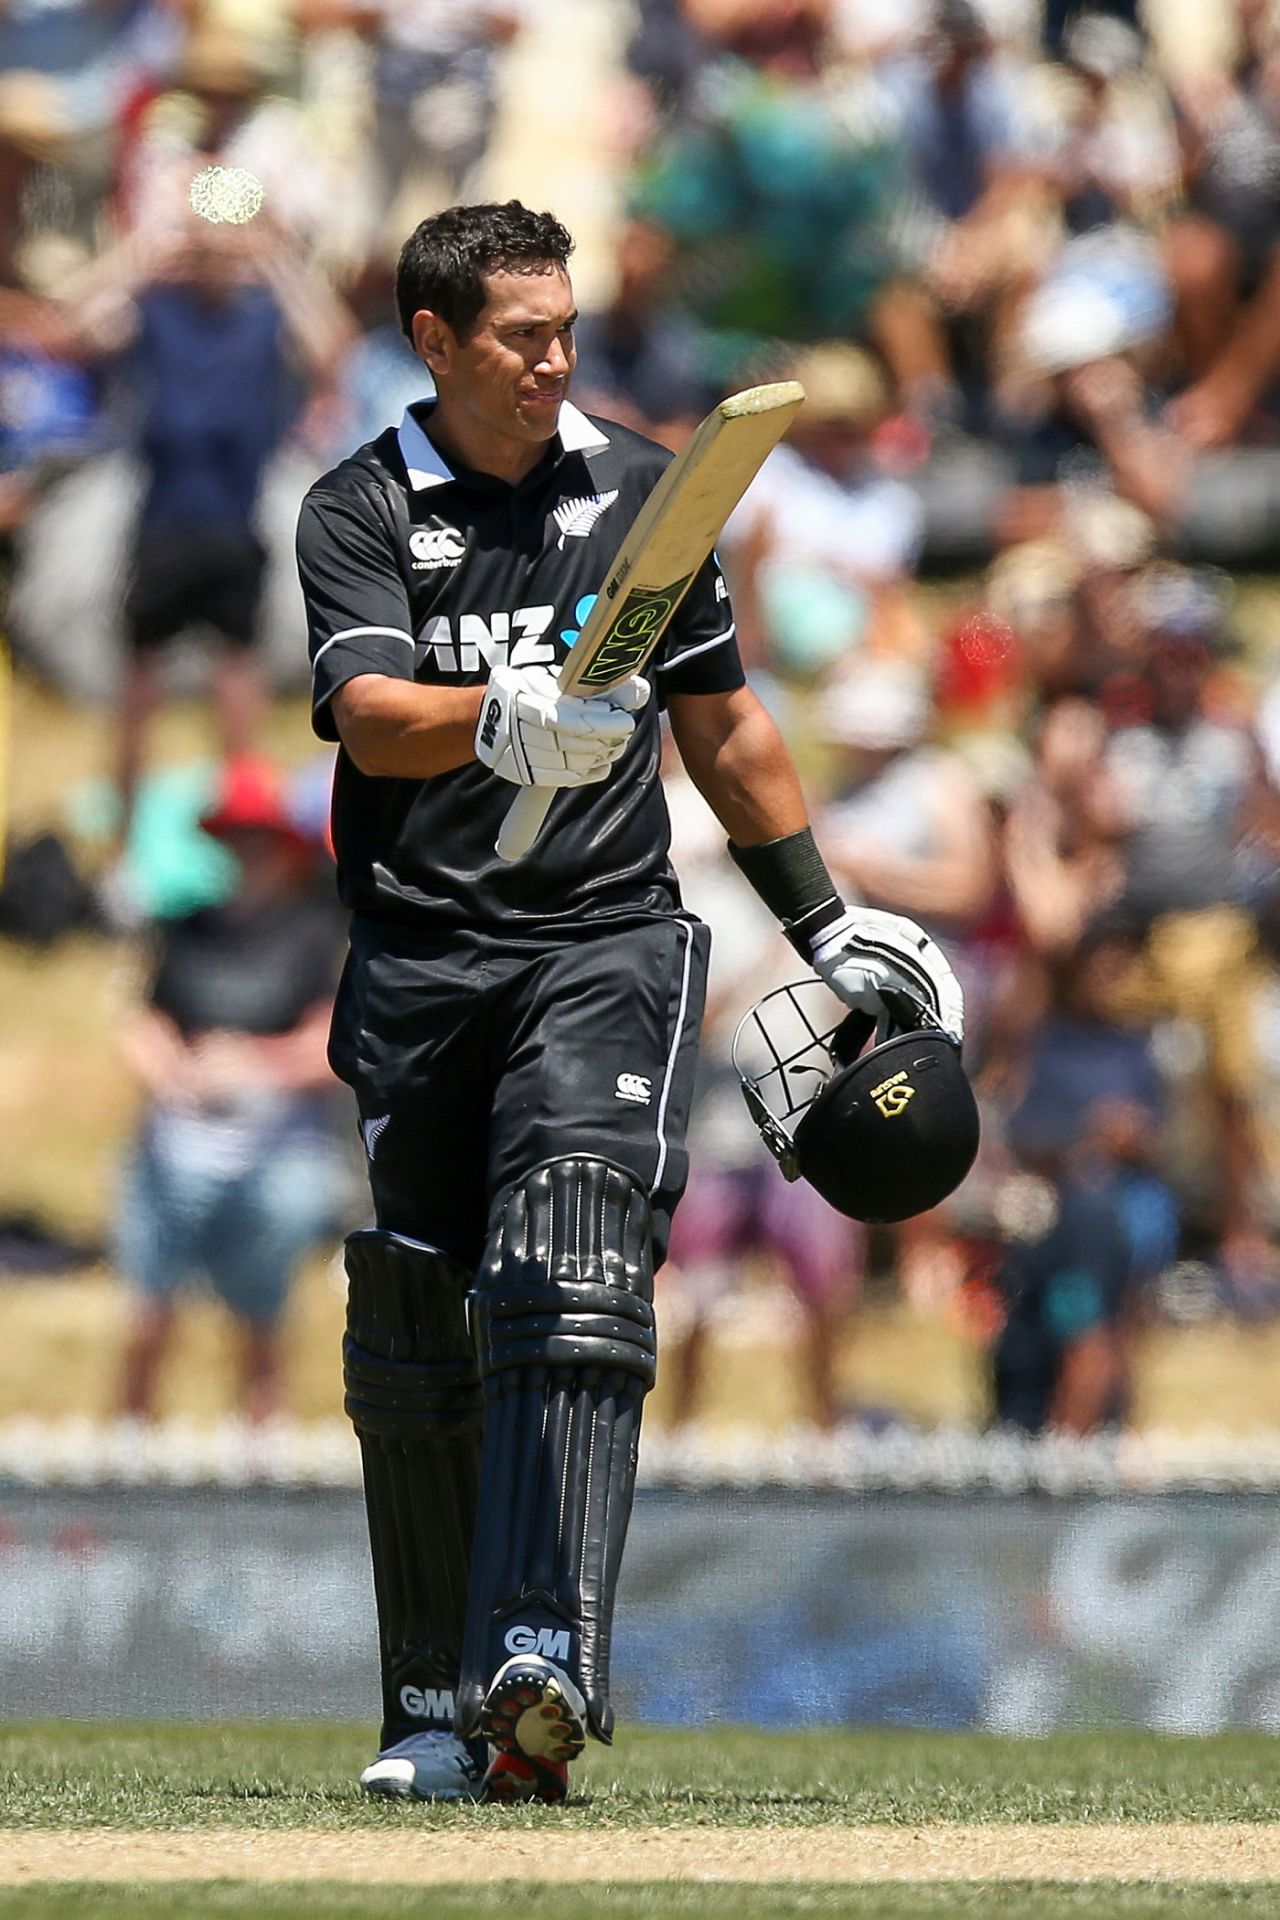 Ross Taylor acknowledges the applause for his 20th ODI century, New Zealand v Sri Lanka, 3rd ODI, Nelson, January 8, 2019